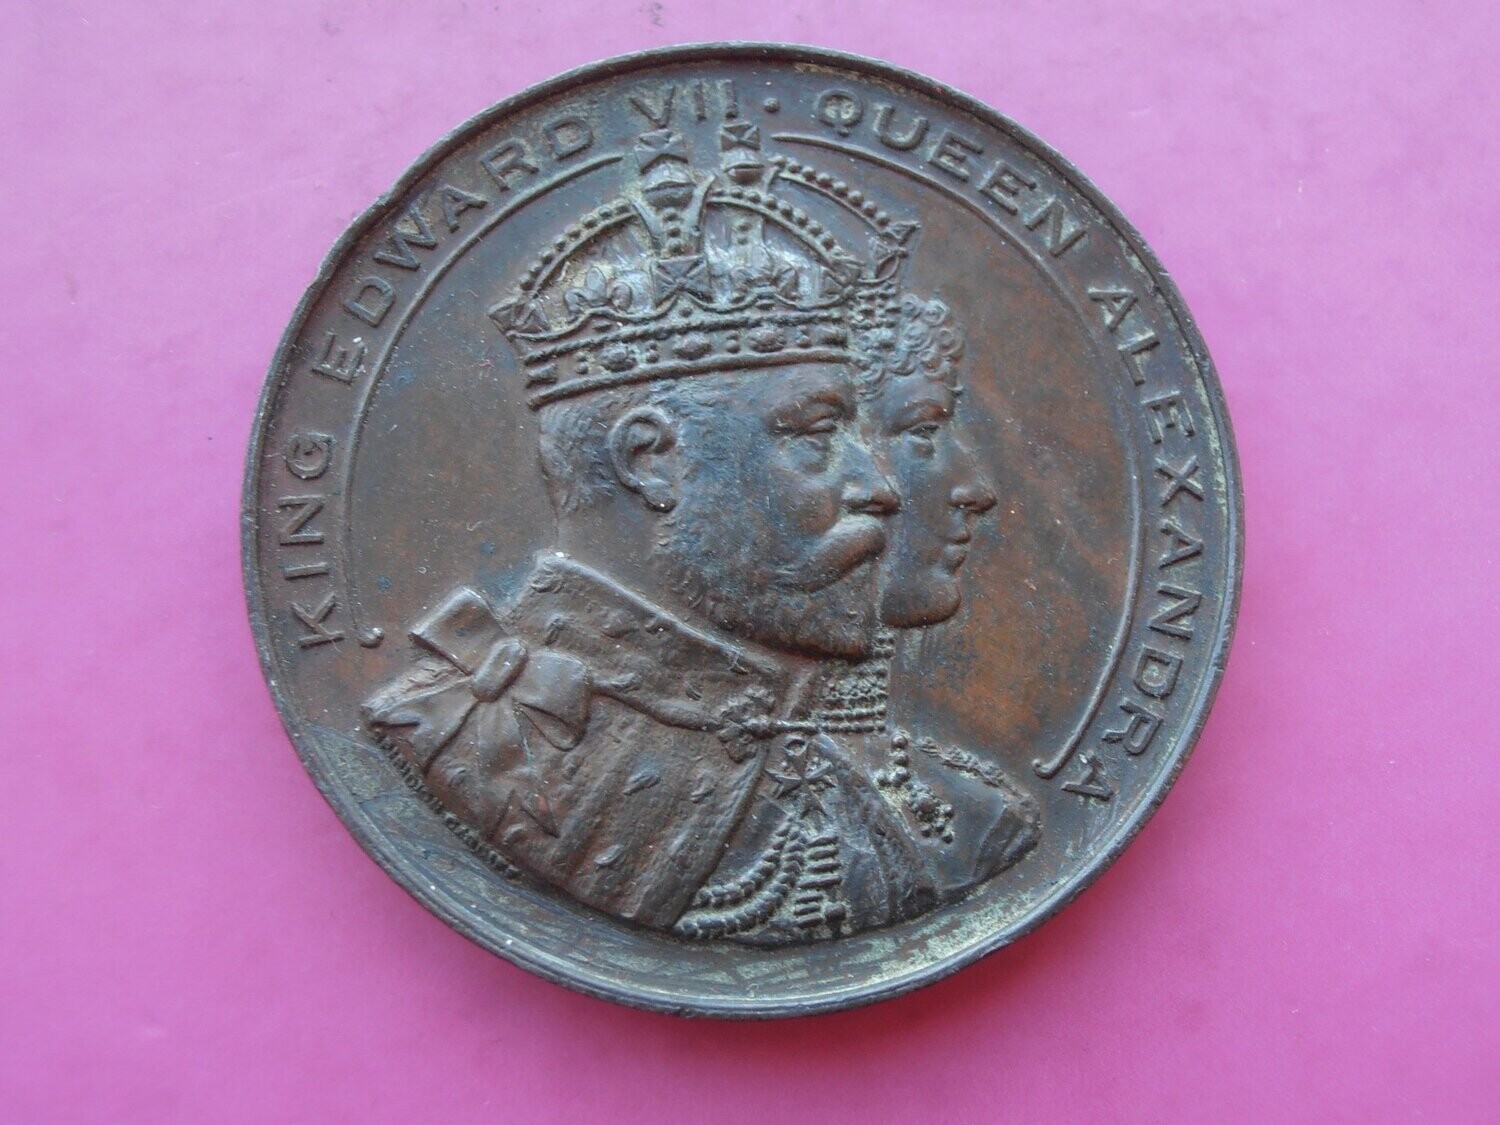 Visit to Cardiff Medal - 1907